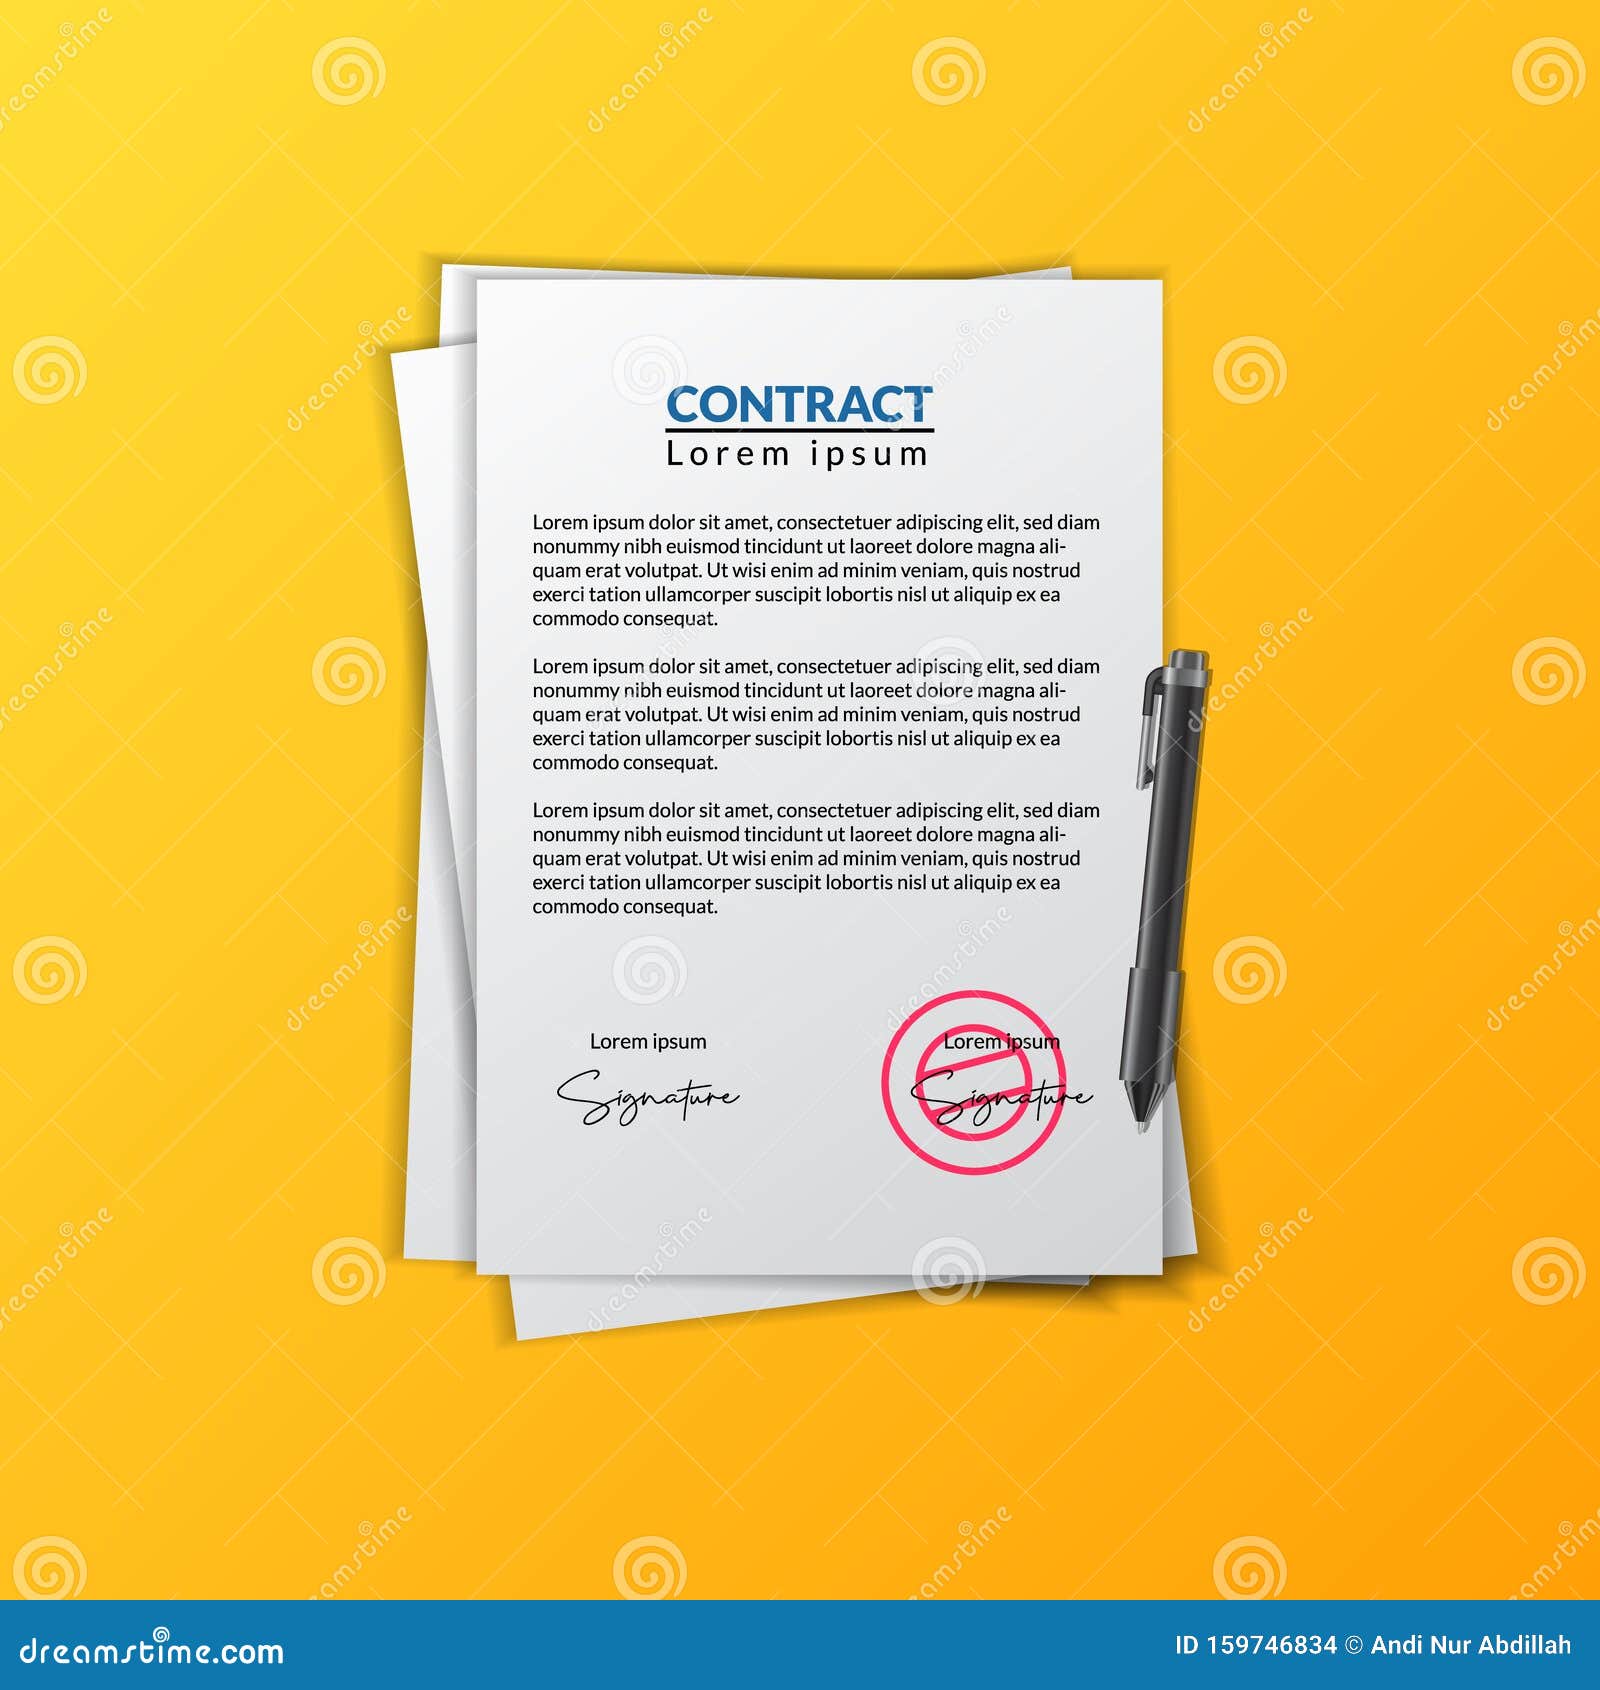 Contract Document Paper with Signature and Stamp for Approval Throughout free newspaper advertising contract template